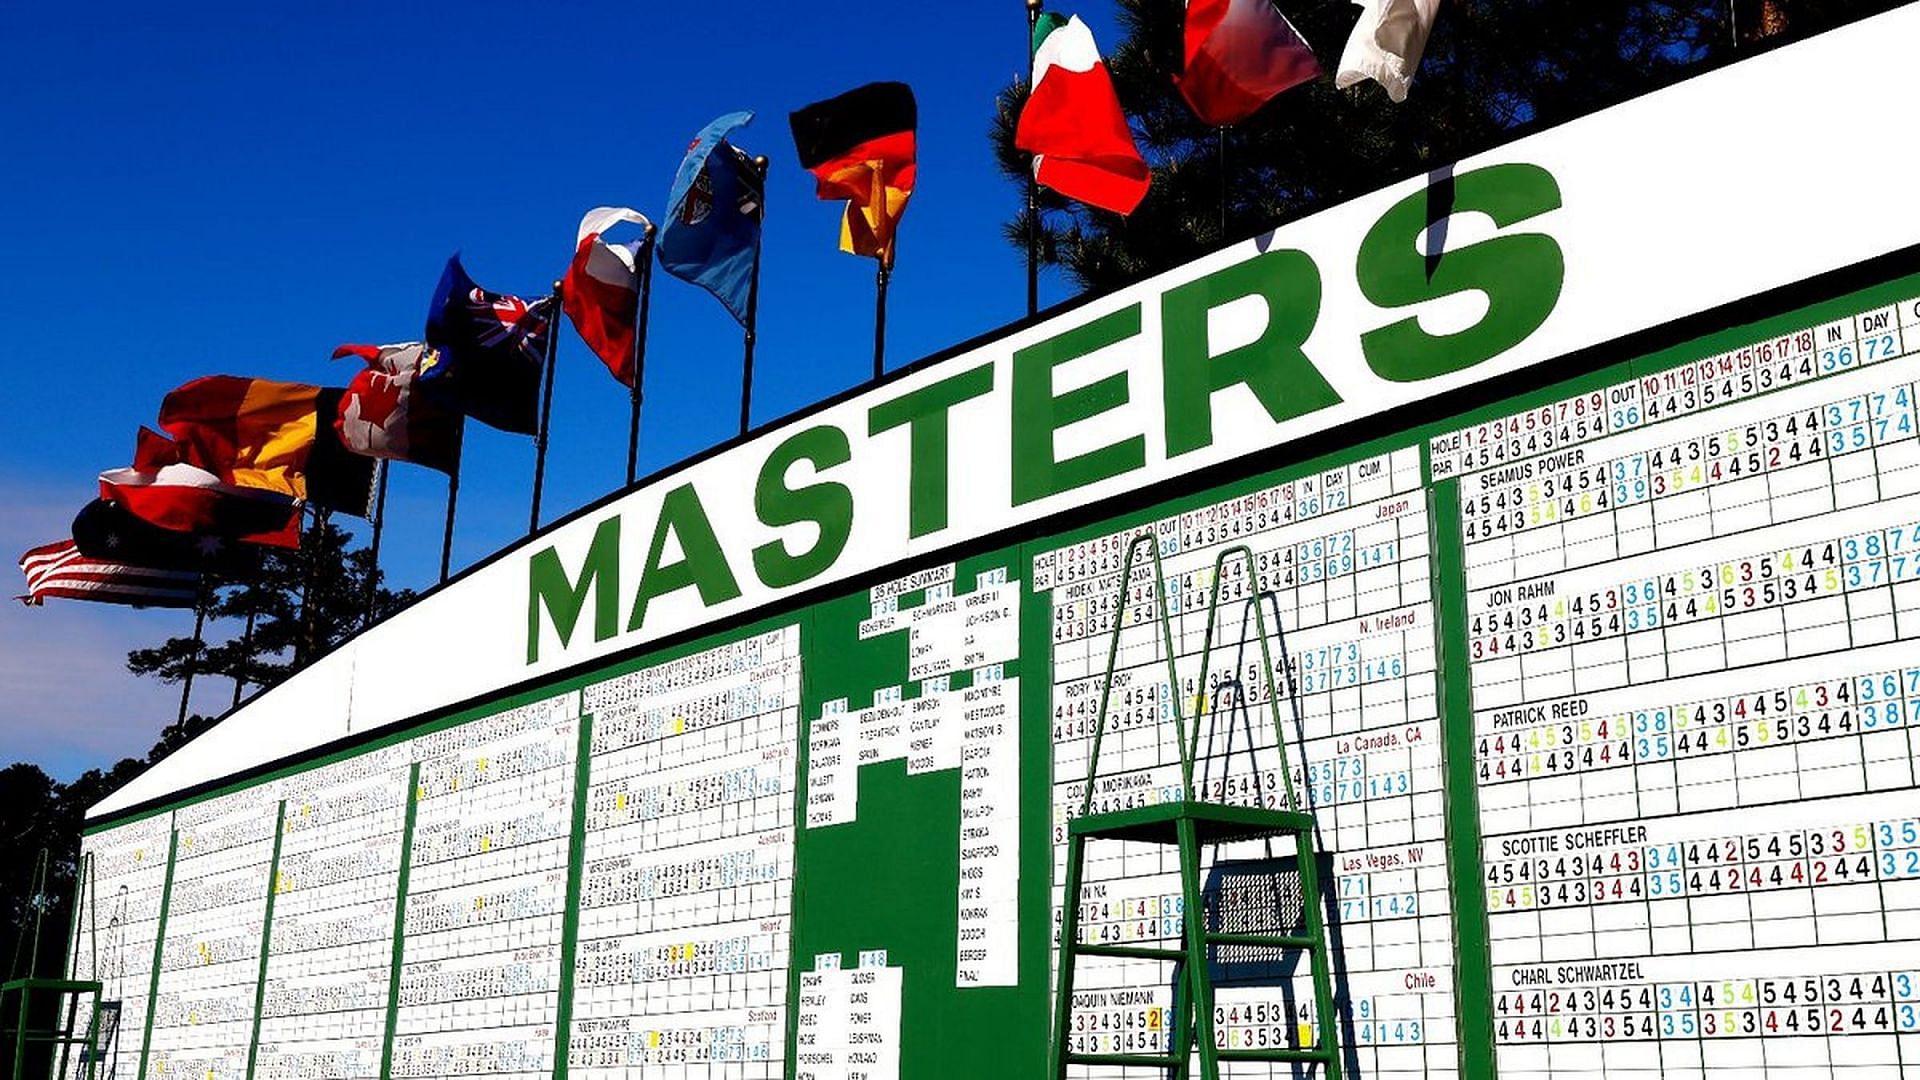 The Masters 2023 Invitations: Golfers confirmed to have received invitations